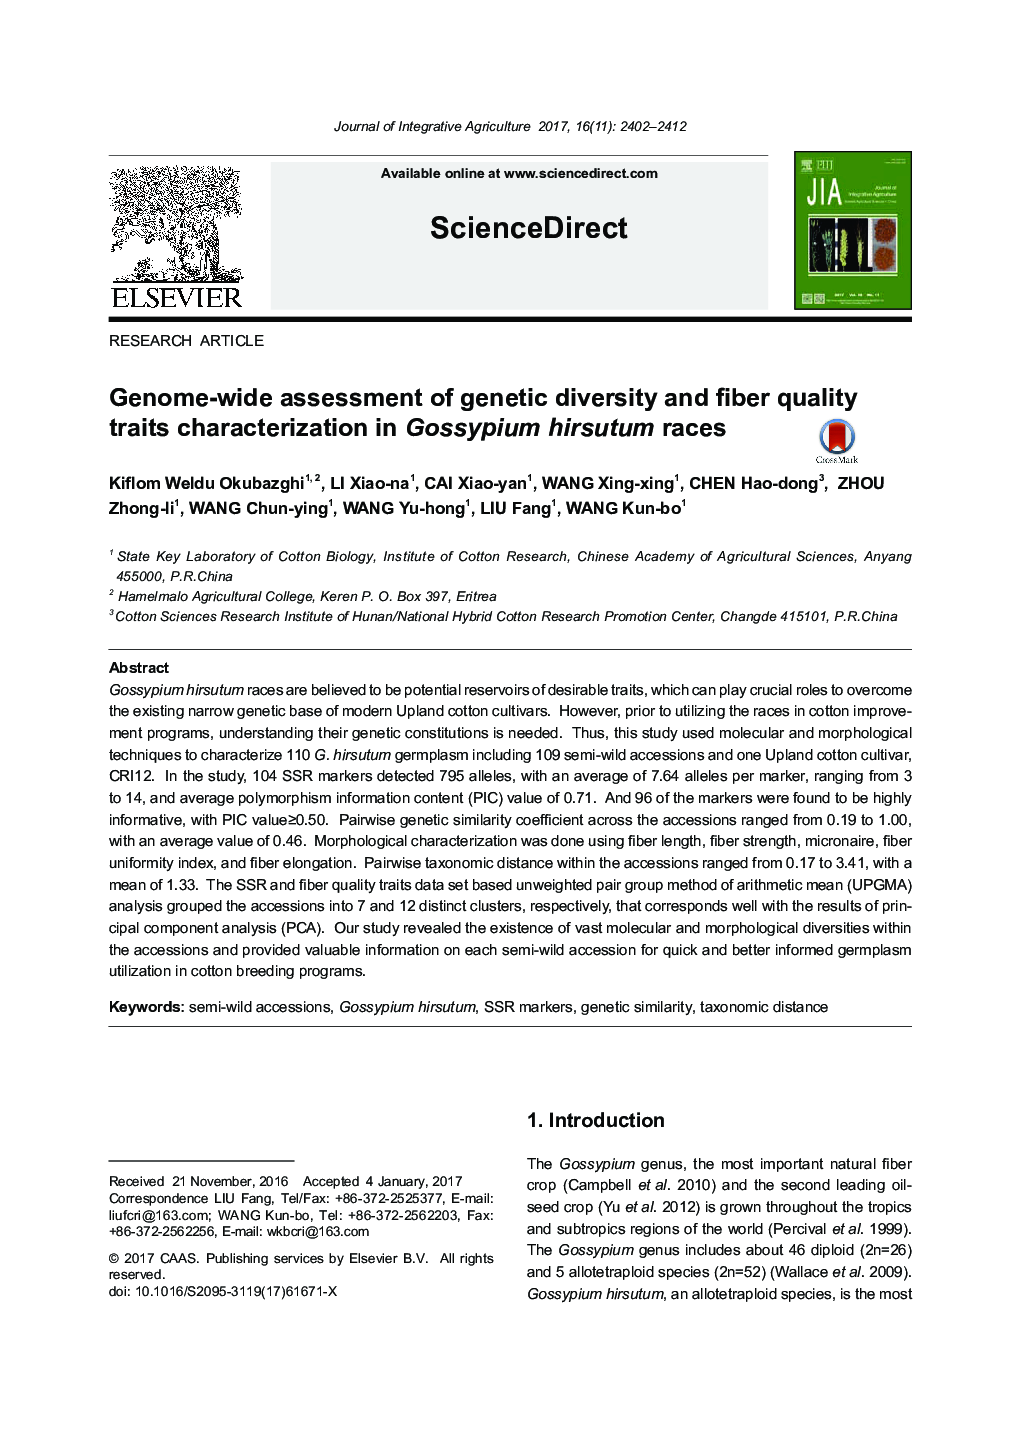 Genome-wide assessment of genetic diversity and fiber quality traits characterization in Gossypium hirsutum races